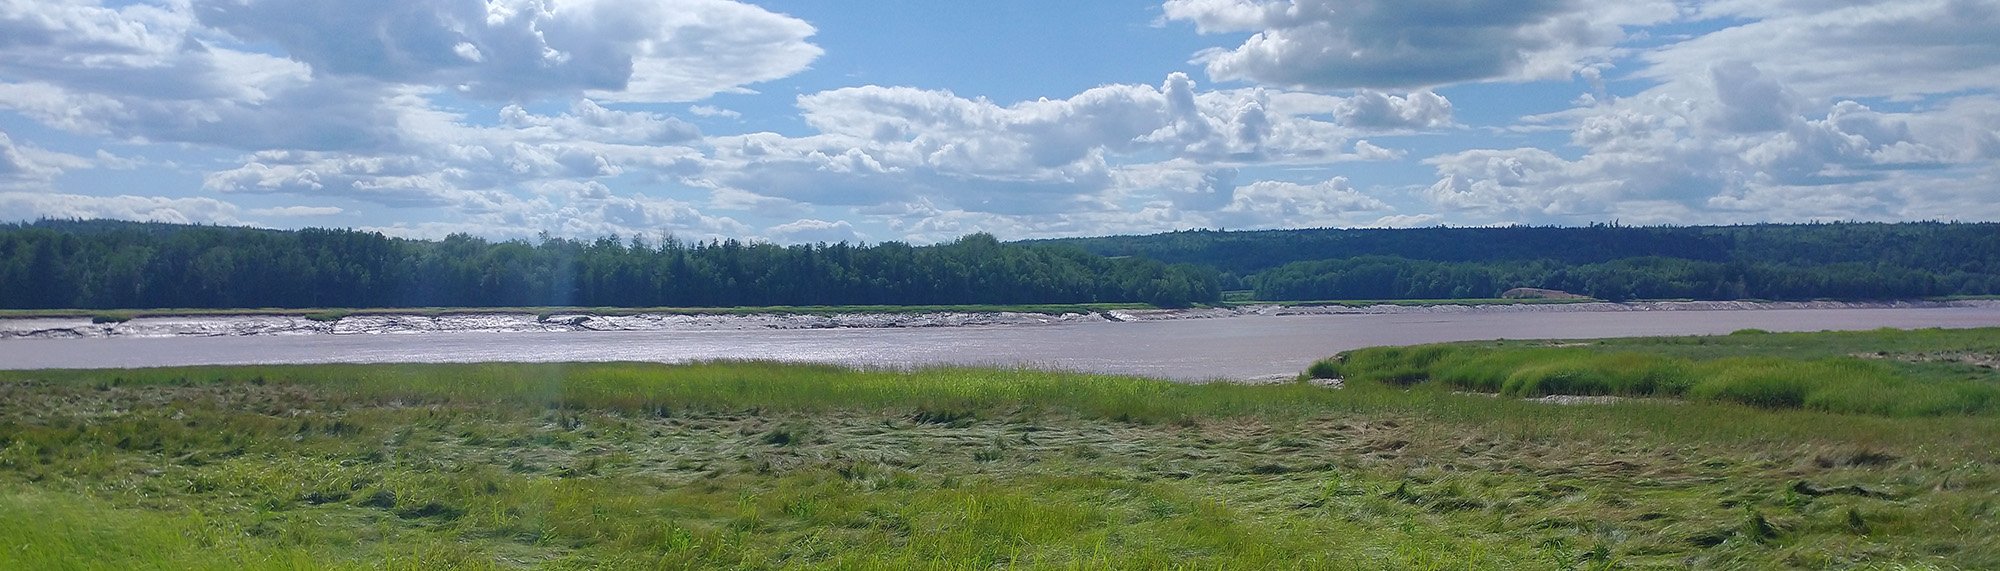 Closer view of the river. Moncton is definitely not a prime cycling destination... More of a hub you stop at on your way to see cooler things.